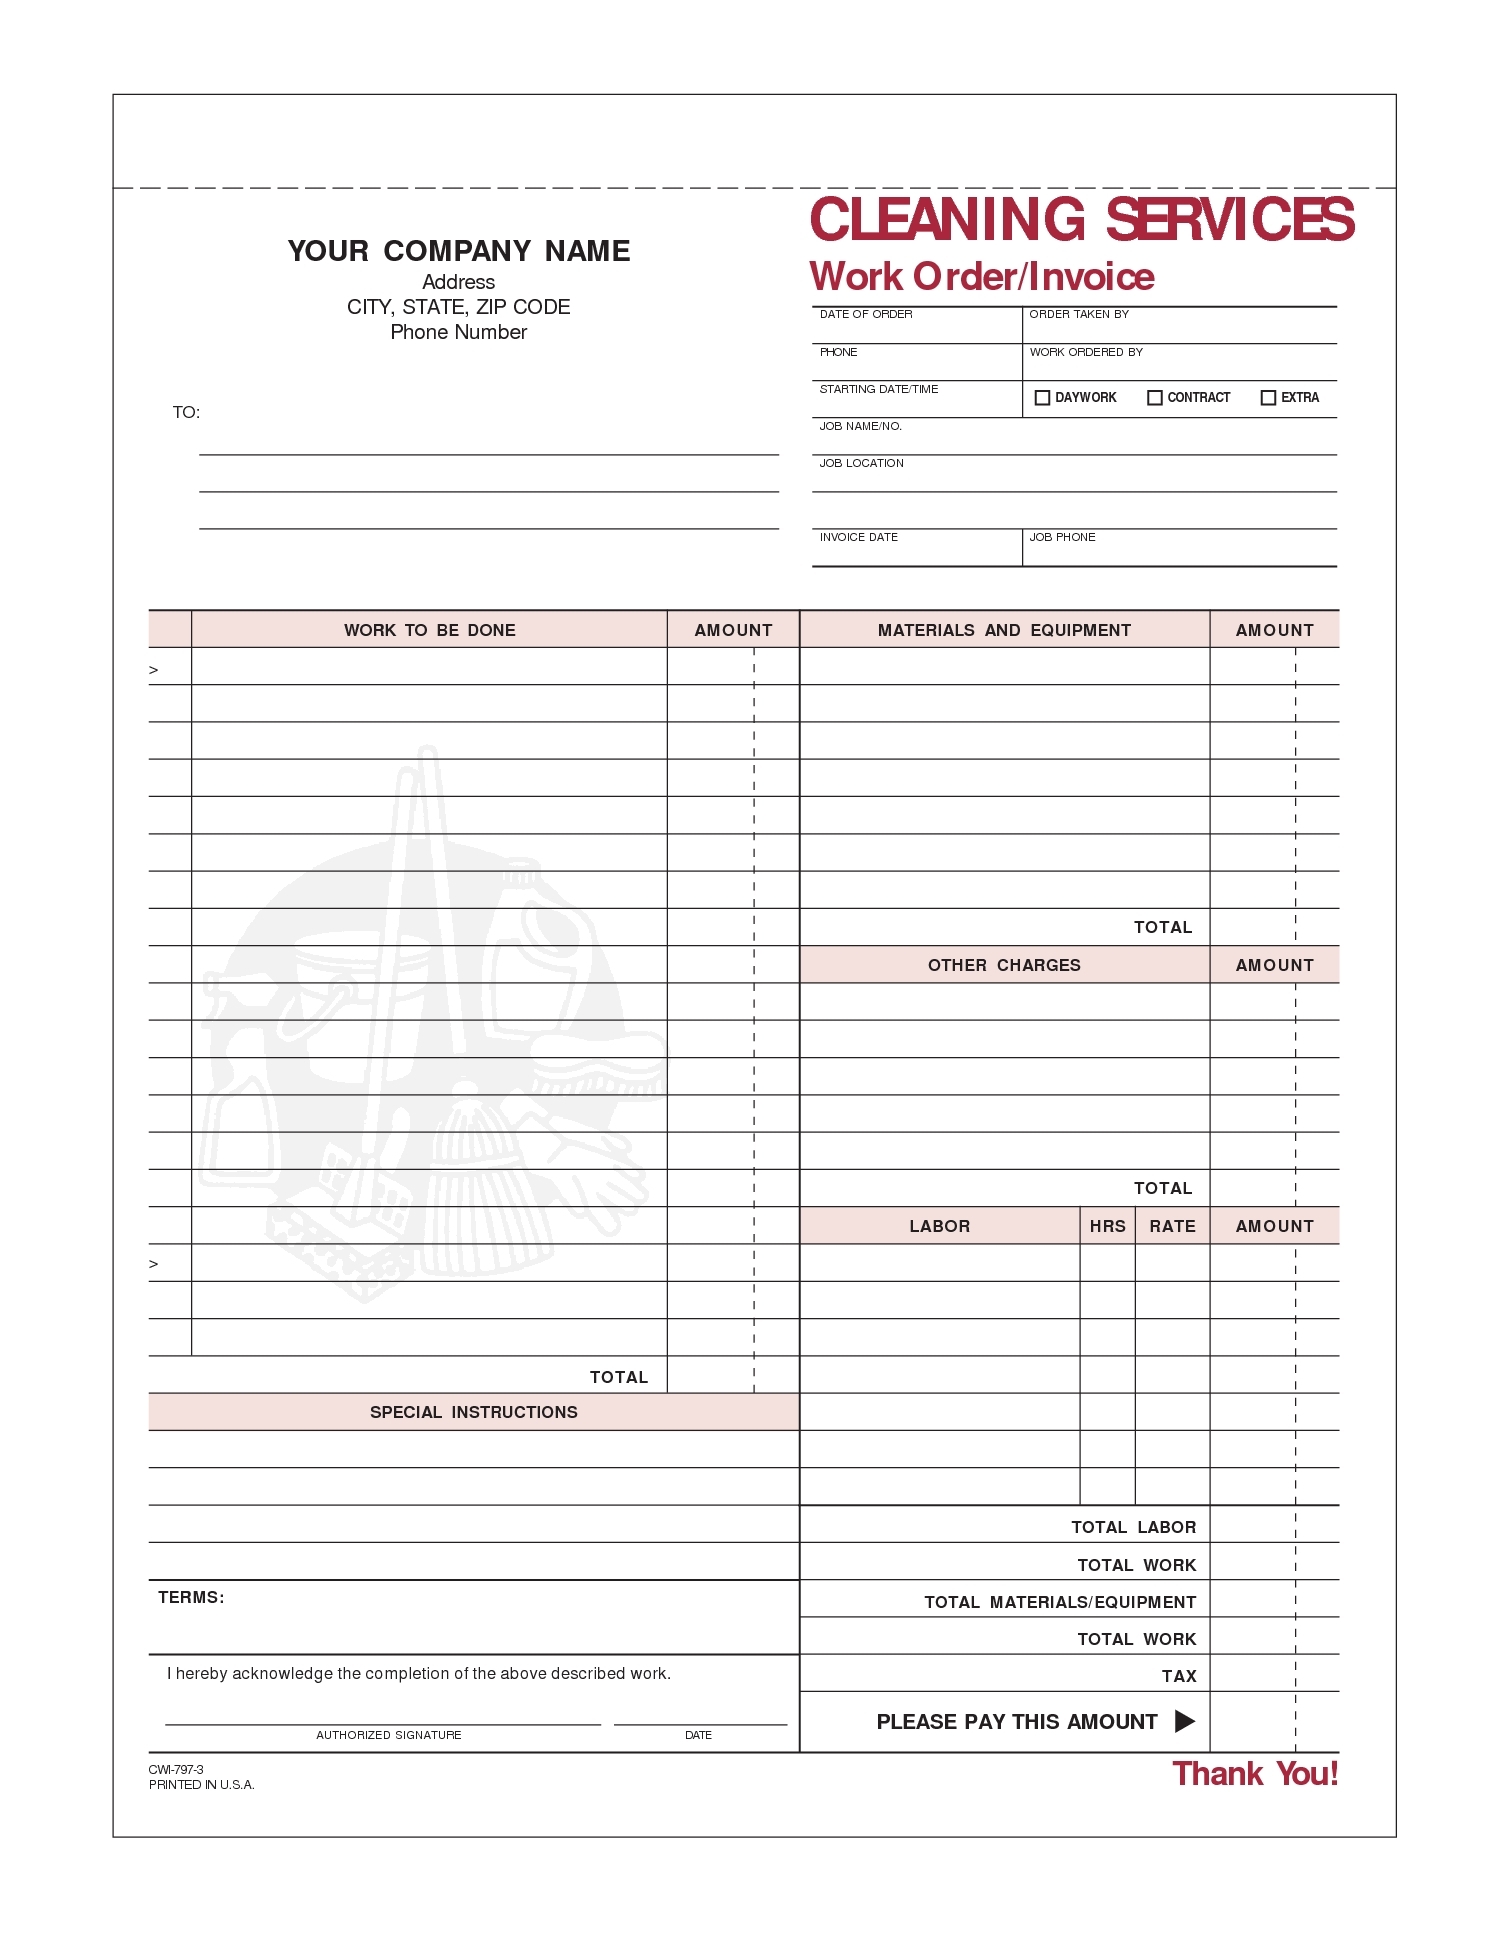 cleaning service invoice template invoice template free 2016 cleaning services invoice sample